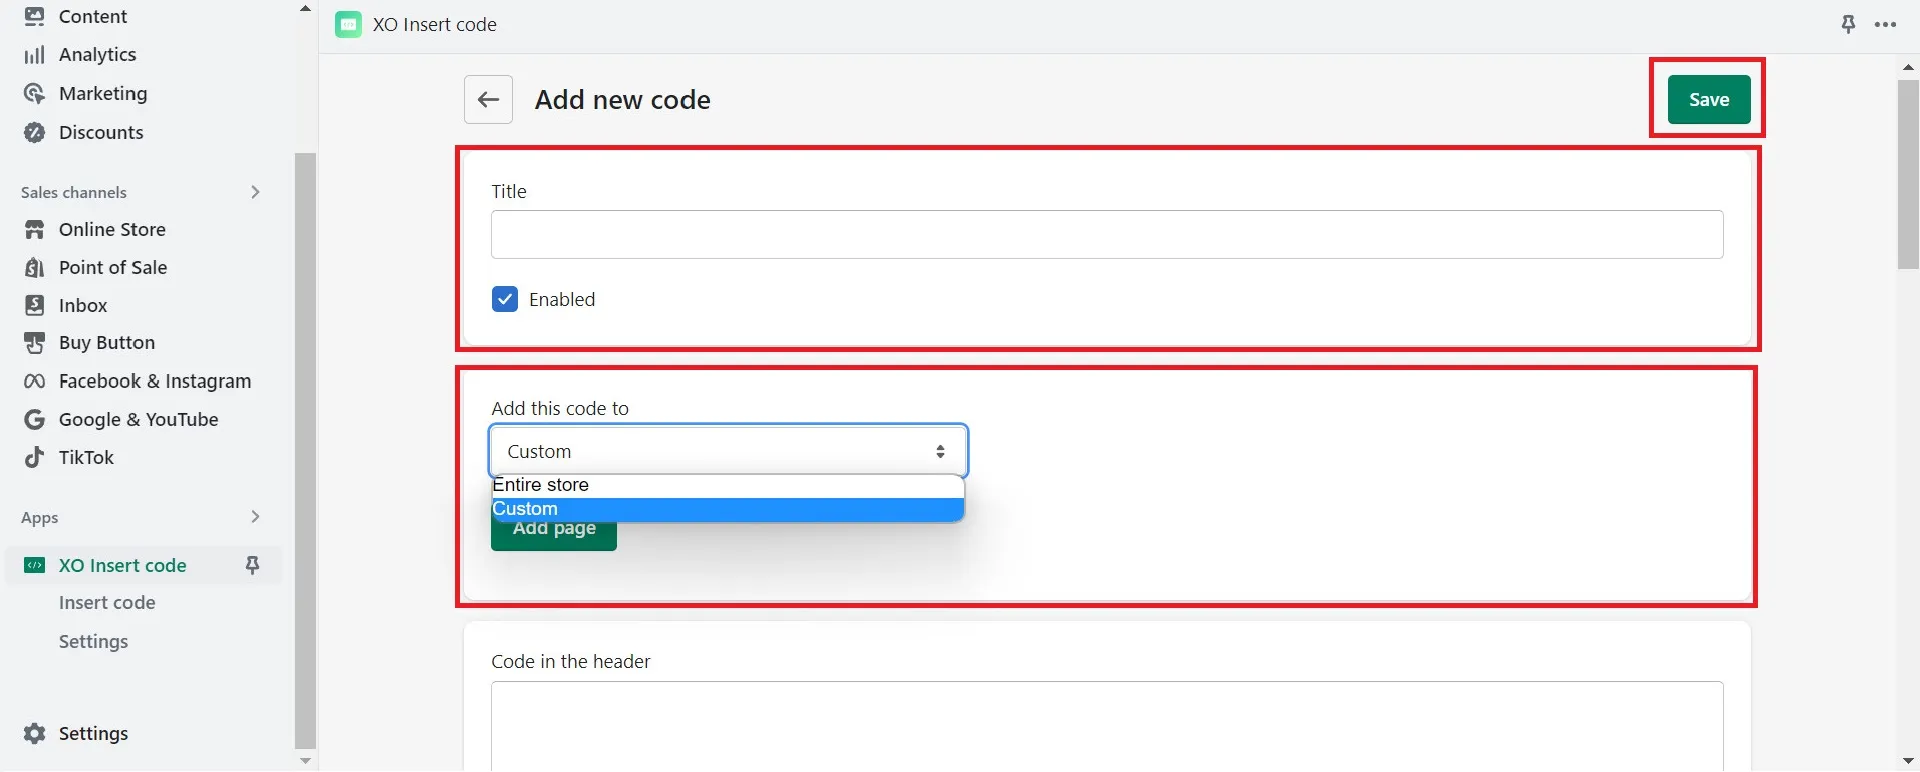 Add new code in header, body or footer.